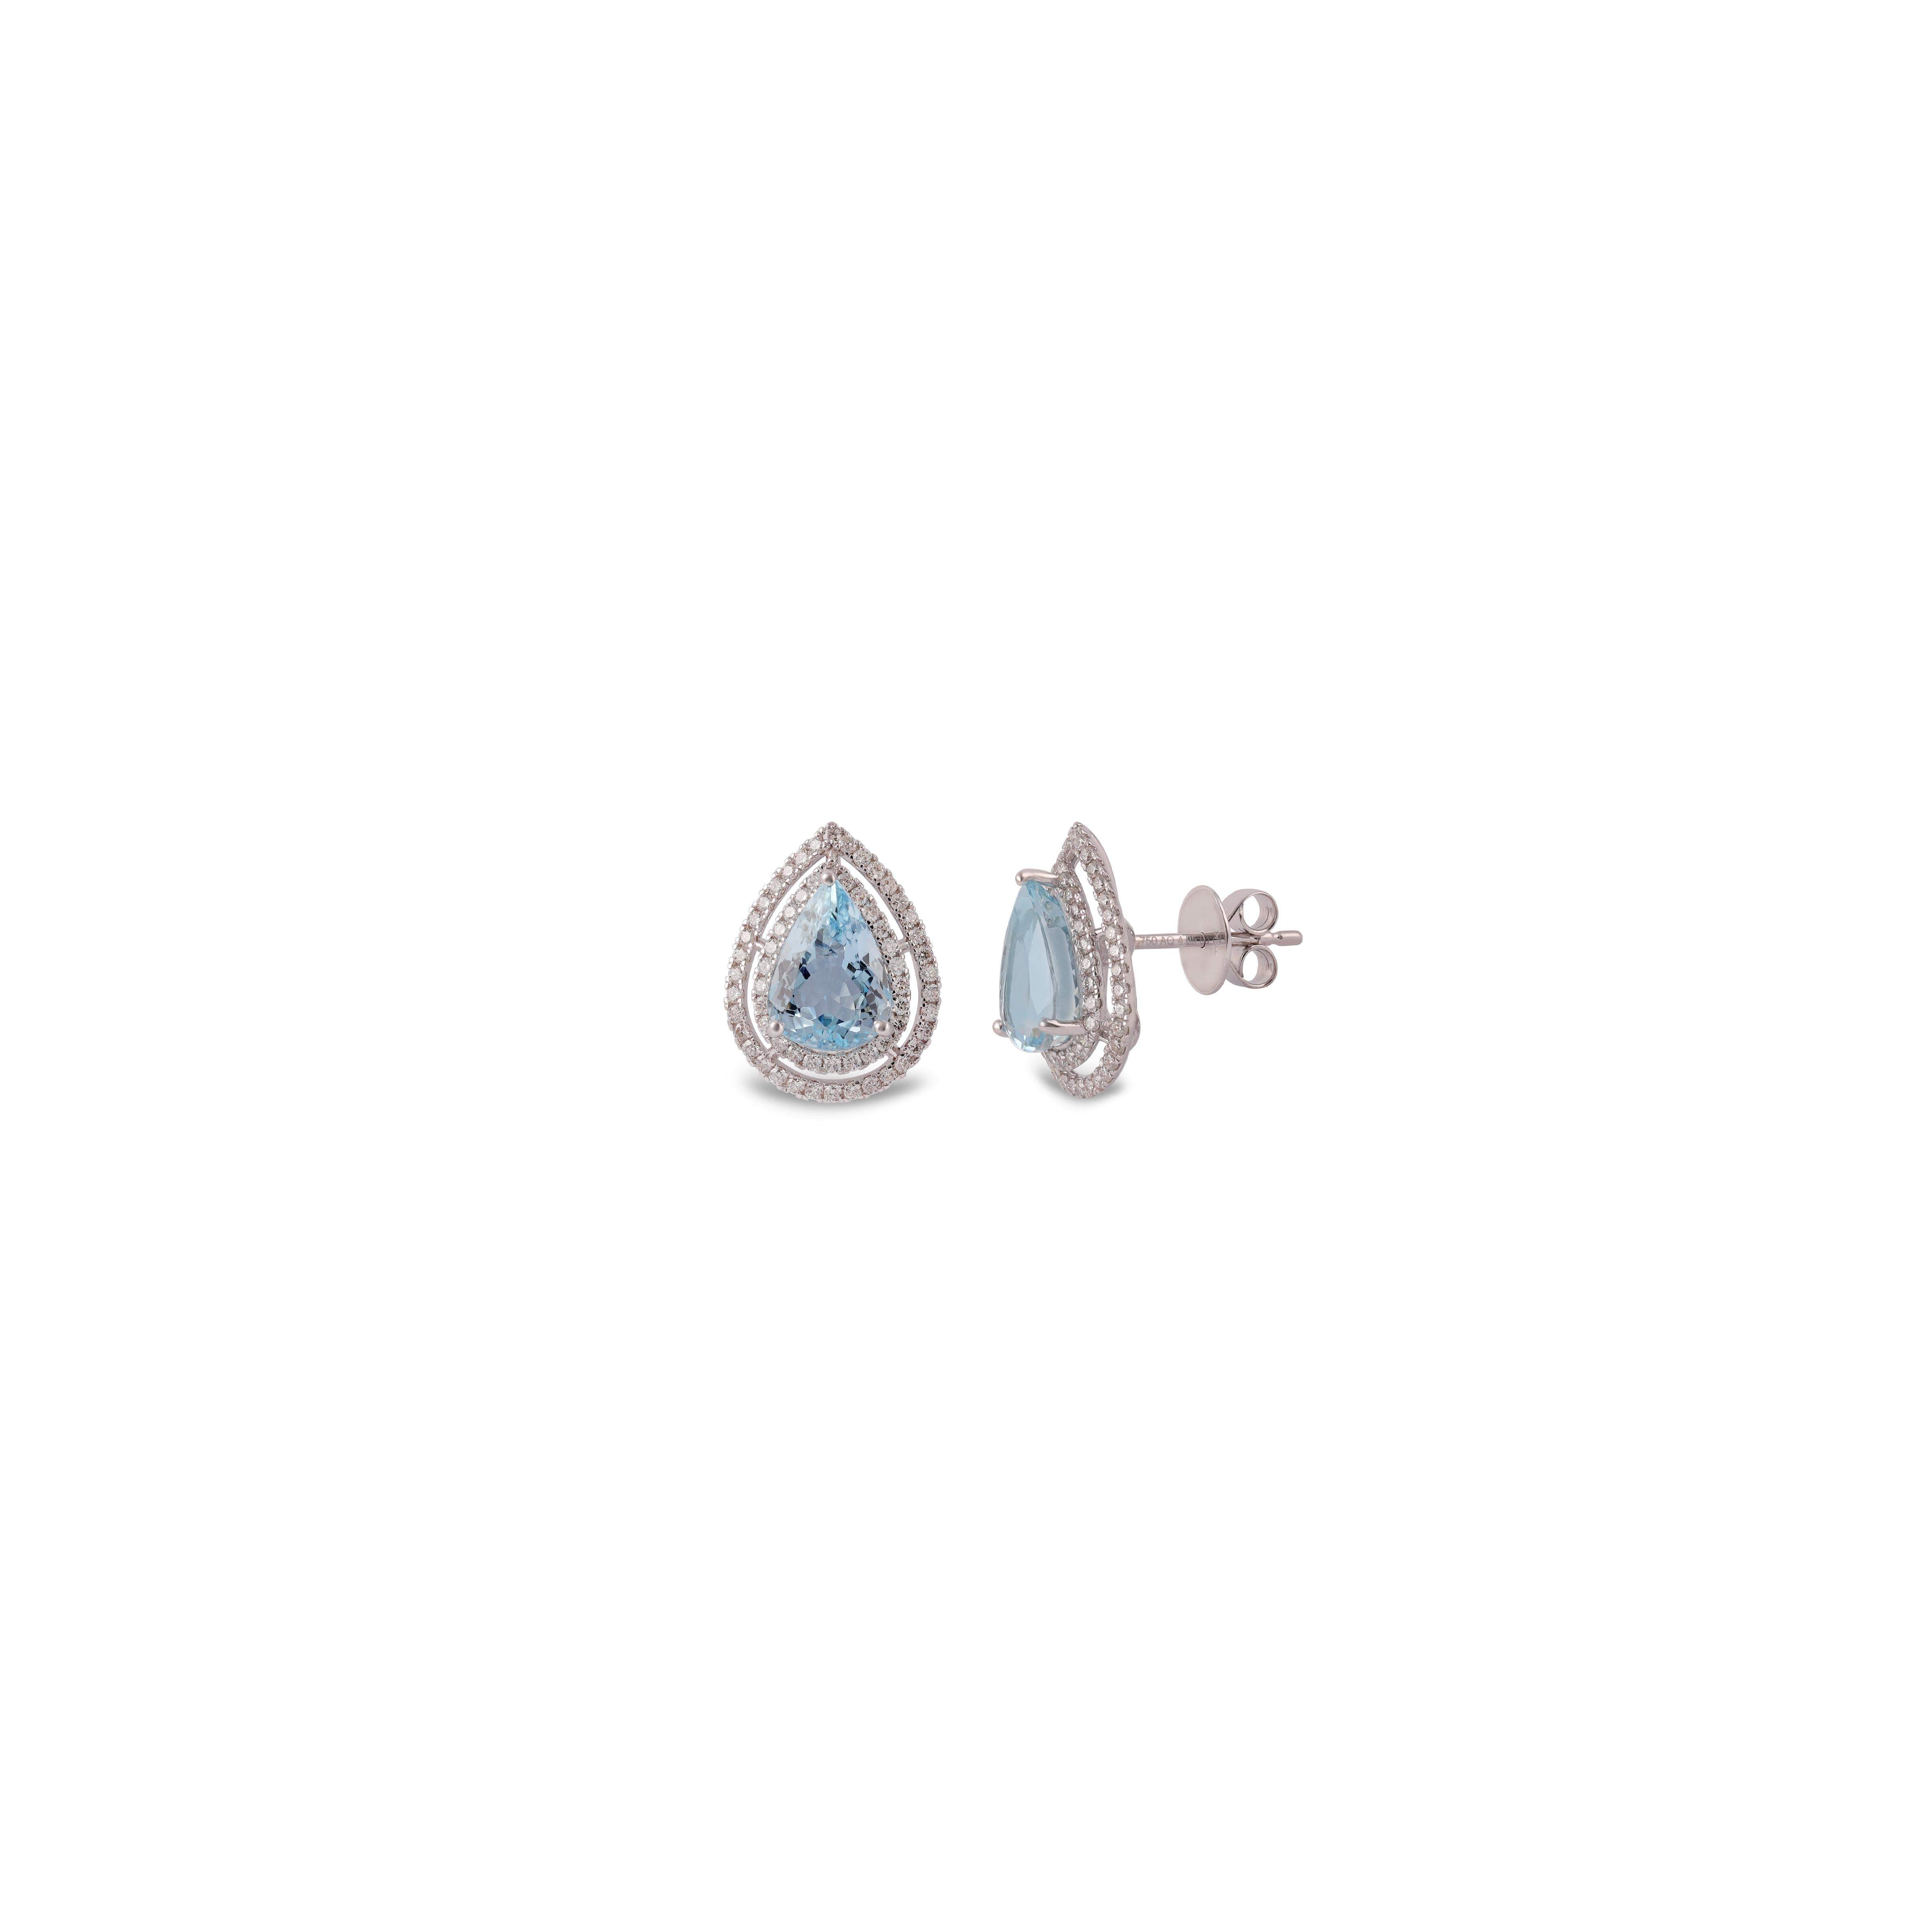 Classical Roman 4.85 Carat Clear Aquamarine & Diamond Cluster Earring Stud in 18K White gold For Sale